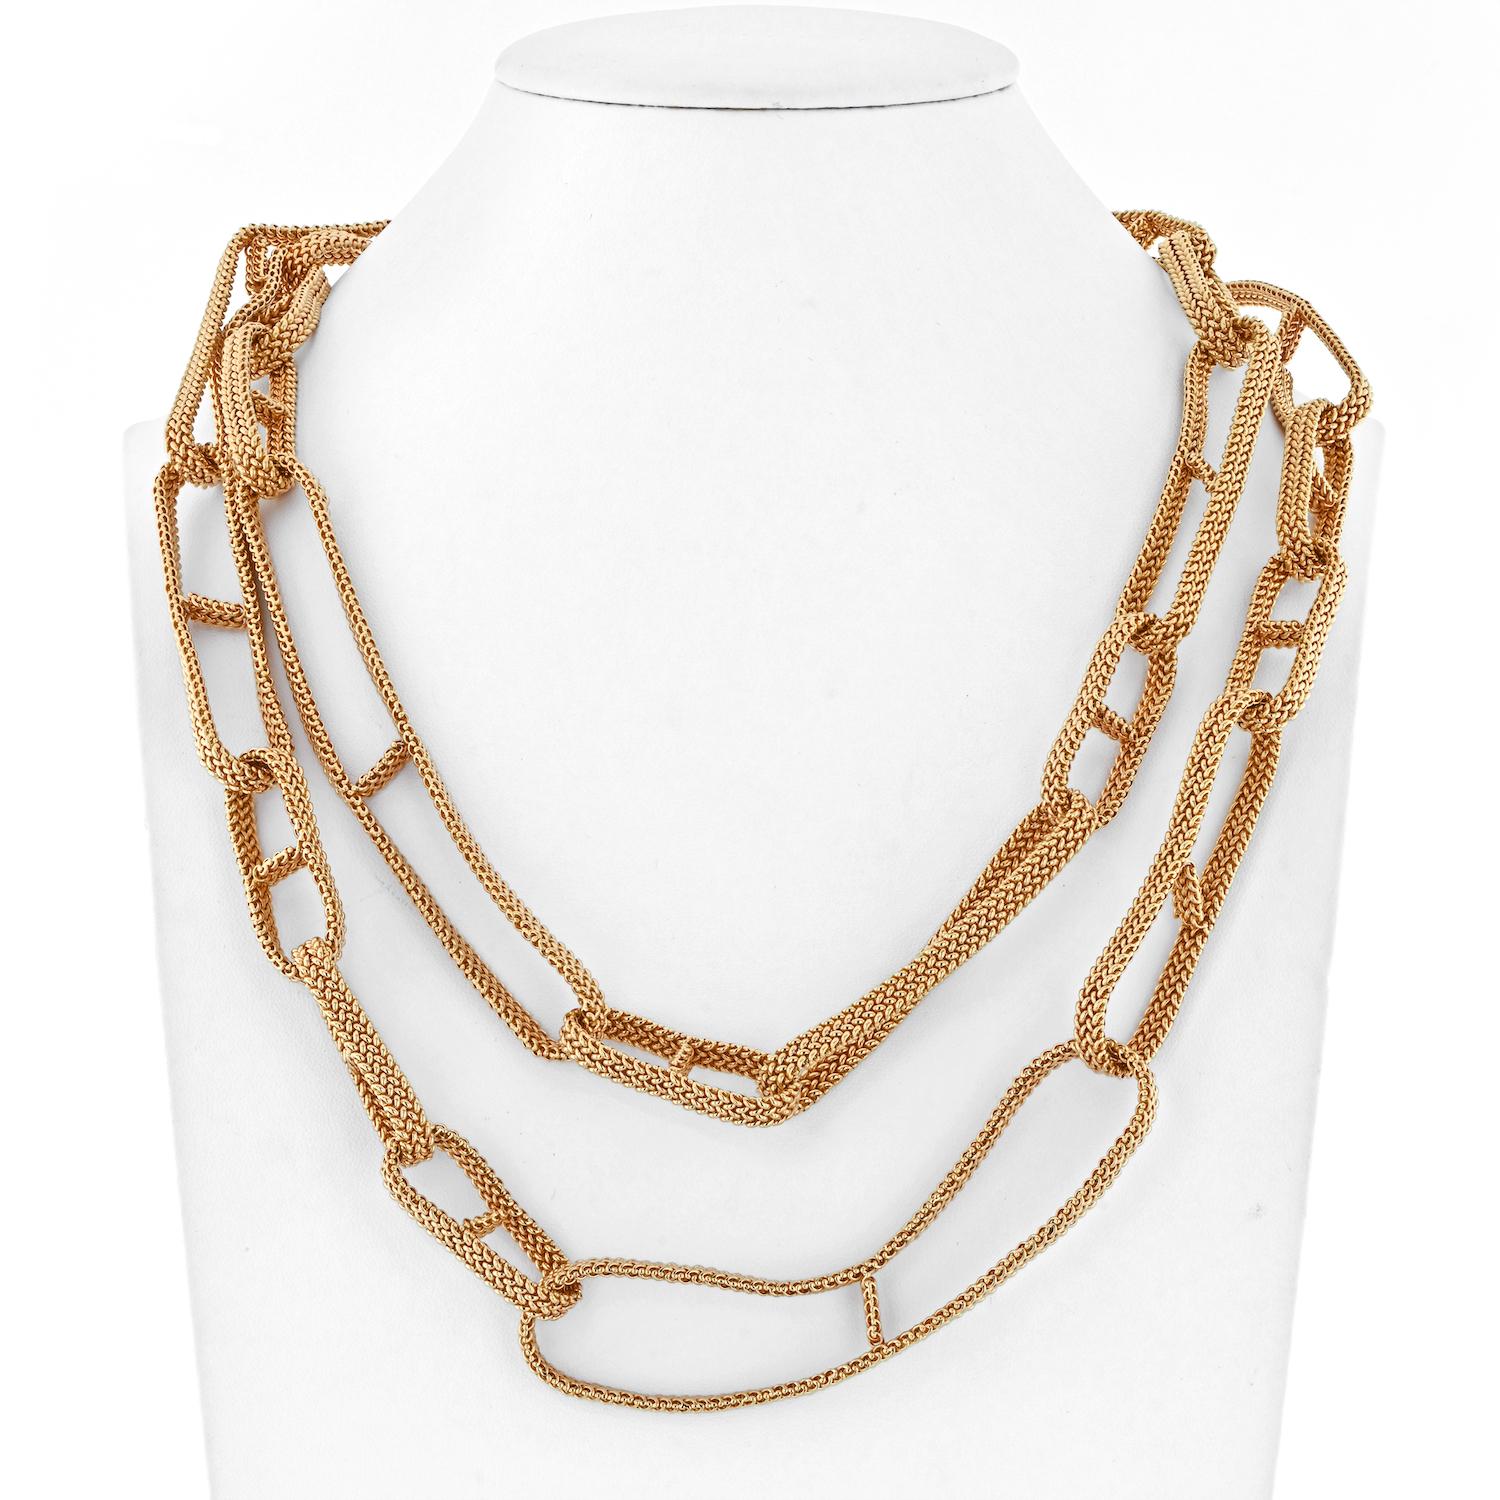 Very rare and special this Hermès 18K Yellow Gold 48 Inches Chaine D'Ancre Extra Large Link Chain Necklace.
It is a one-strand necklace made of open woven style links, finished by an anchor style lock. This necklace can be doubled around the neck